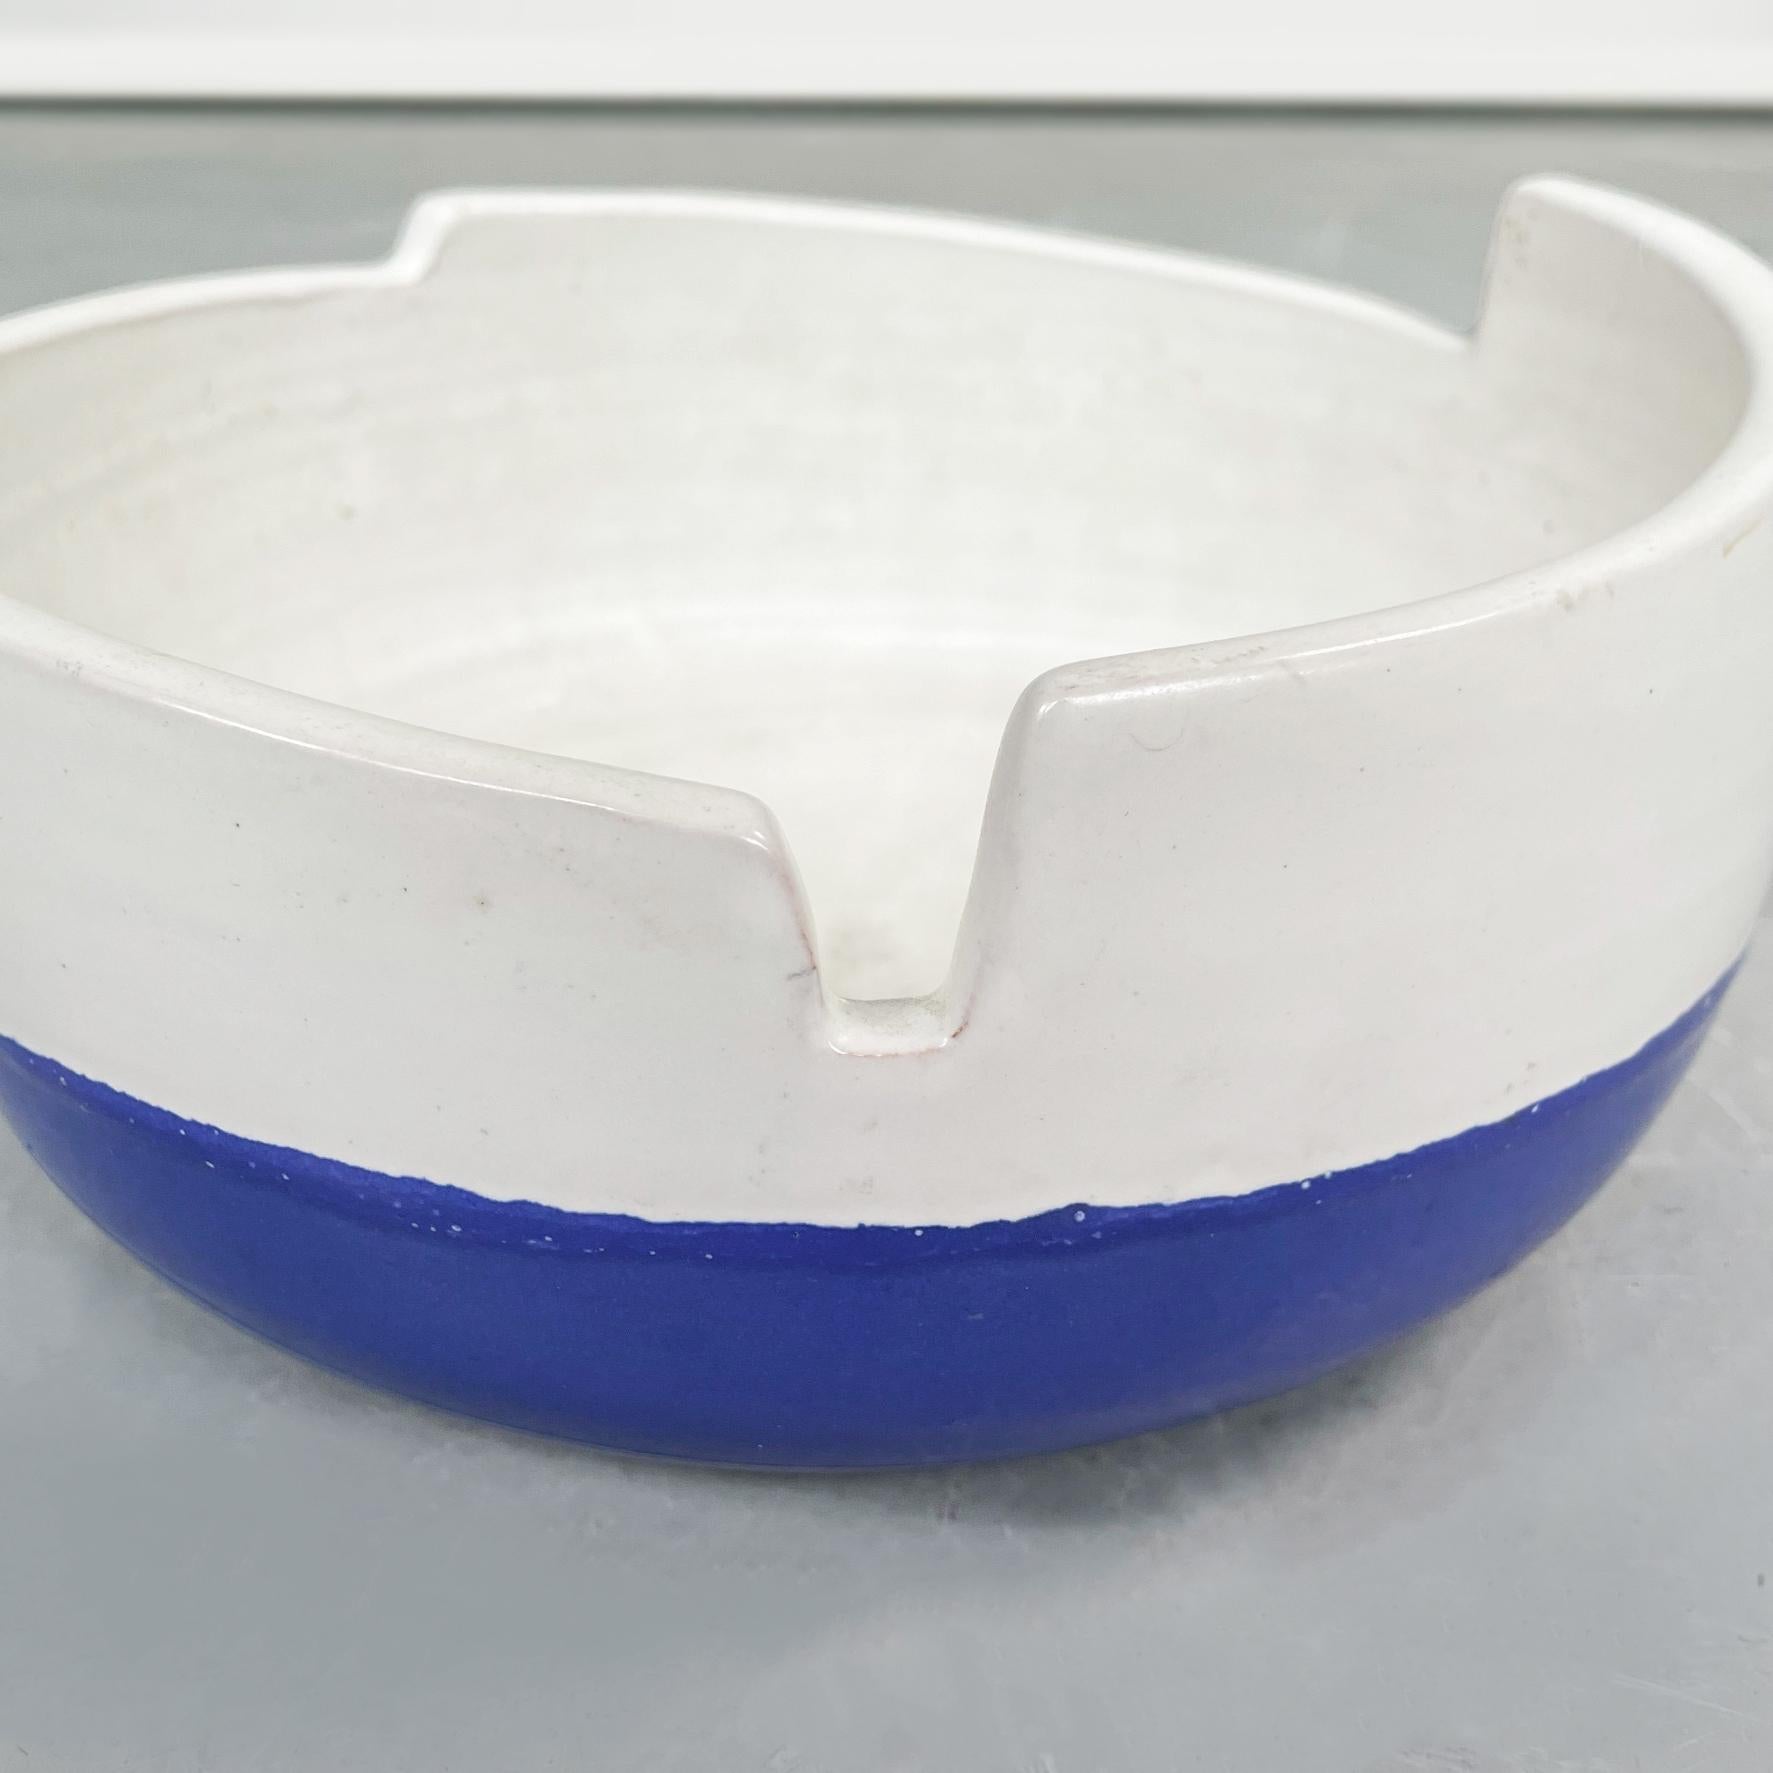 Late 20th Century Italian Mid-Century Round Bowl in Glazed Ceramic Blue N White by Sottsass, 1980s